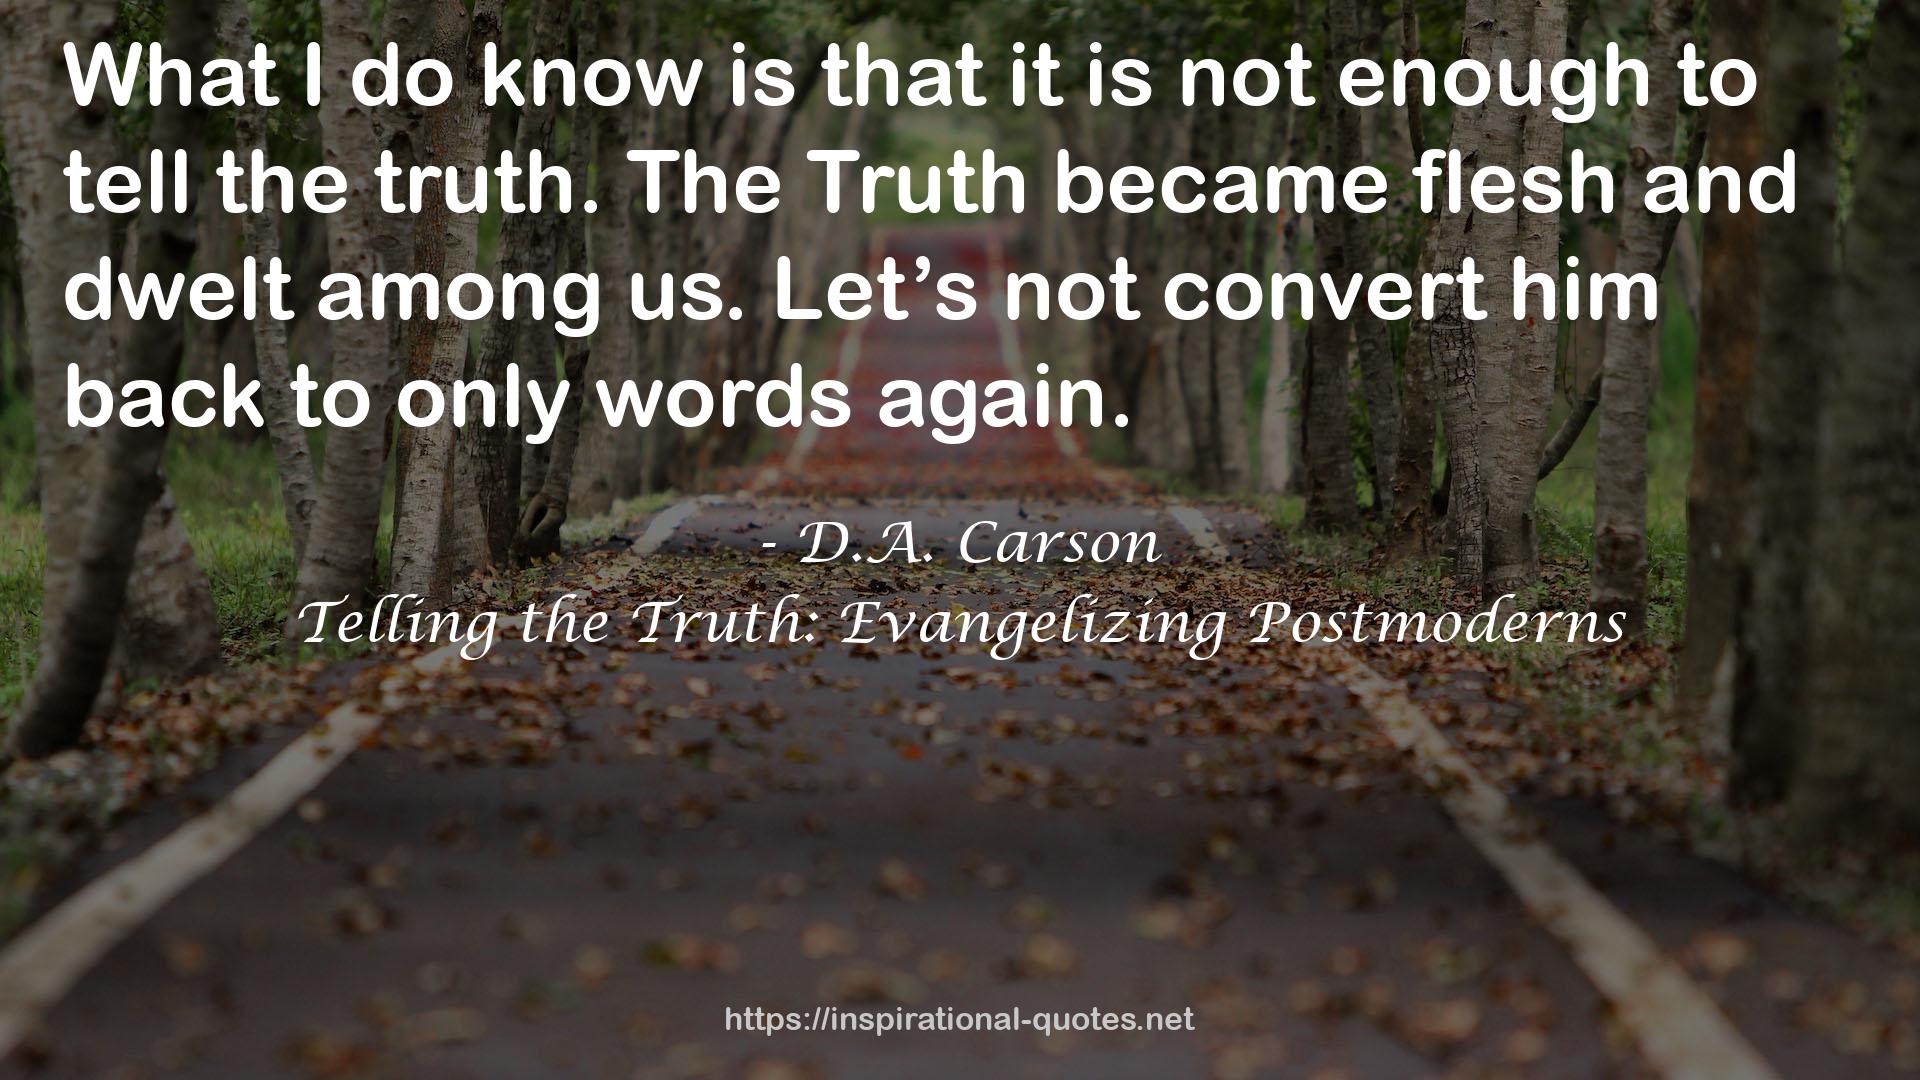 Telling the Truth: Evangelizing Postmoderns QUOTES